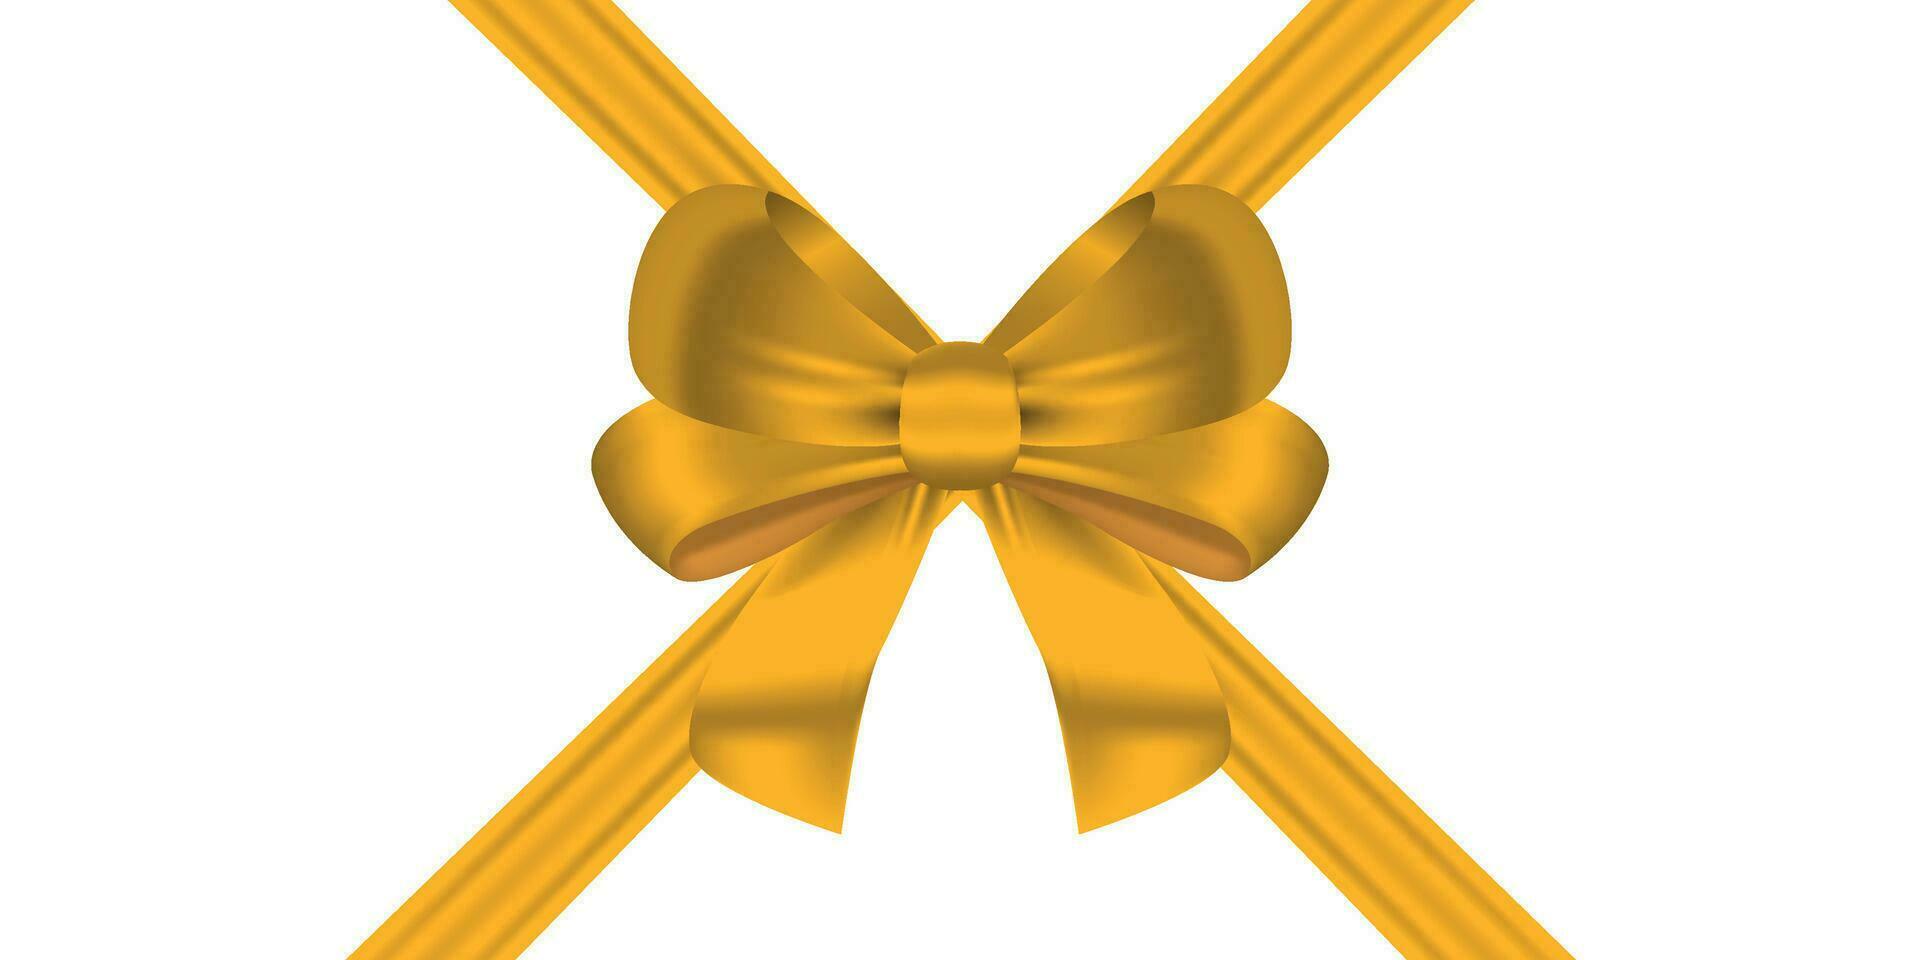 Gold bow and ribbon realistic color with shadow. Diagonal cross ribbon for decorate gift boxes, wedding invitation or greeting card. Bow and ribbon vector Illustration